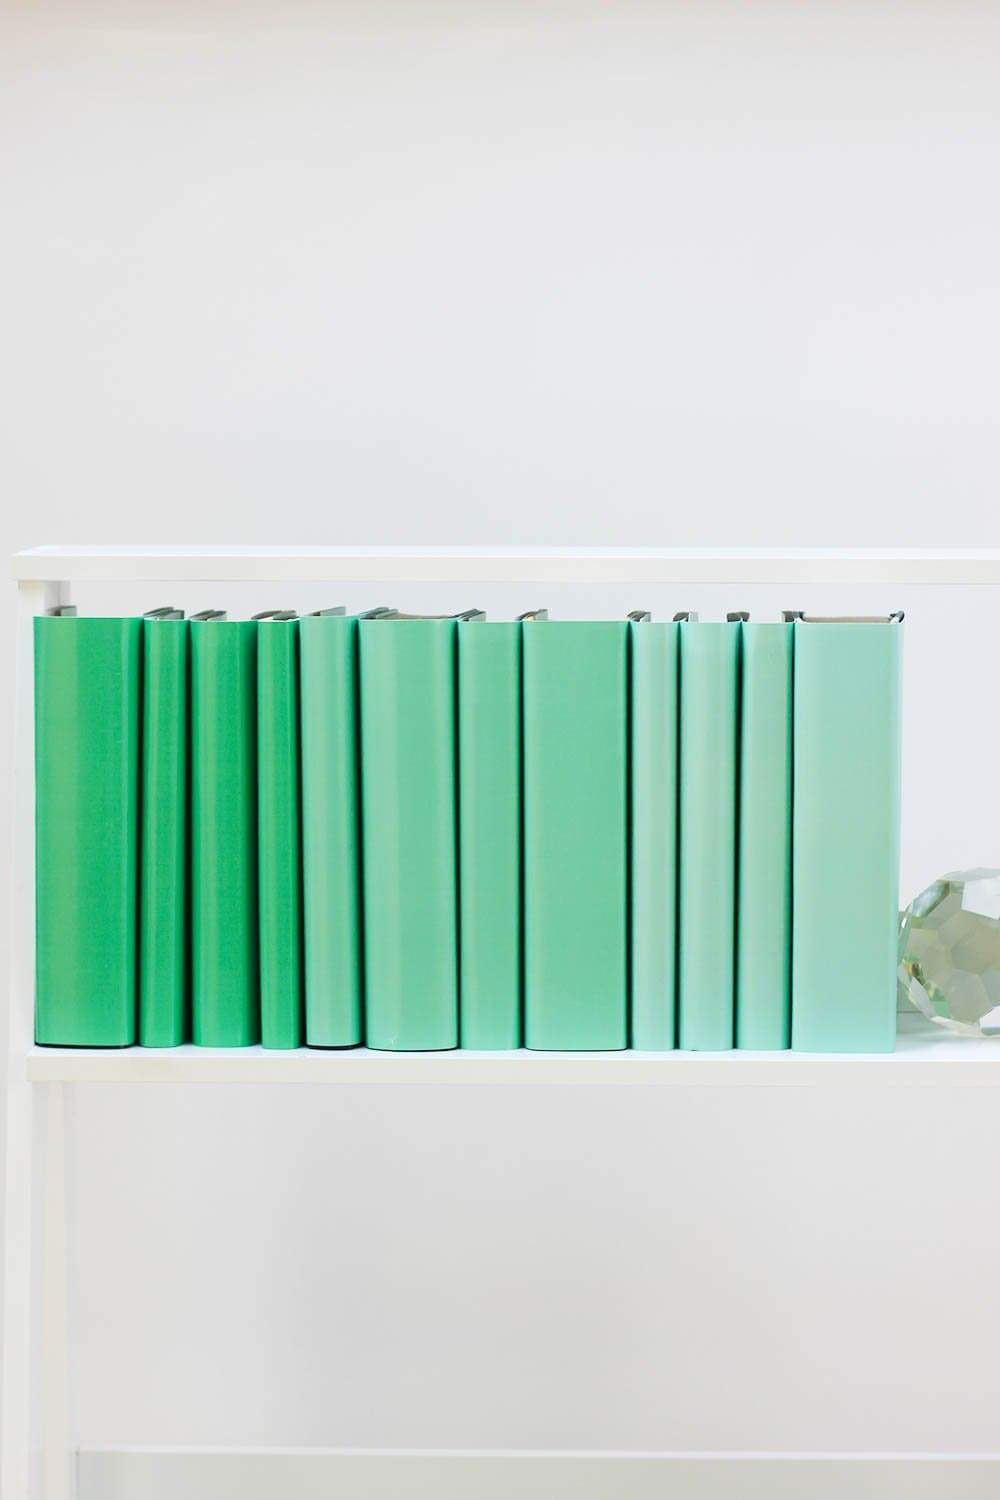 Set of styled green books made with green book covers